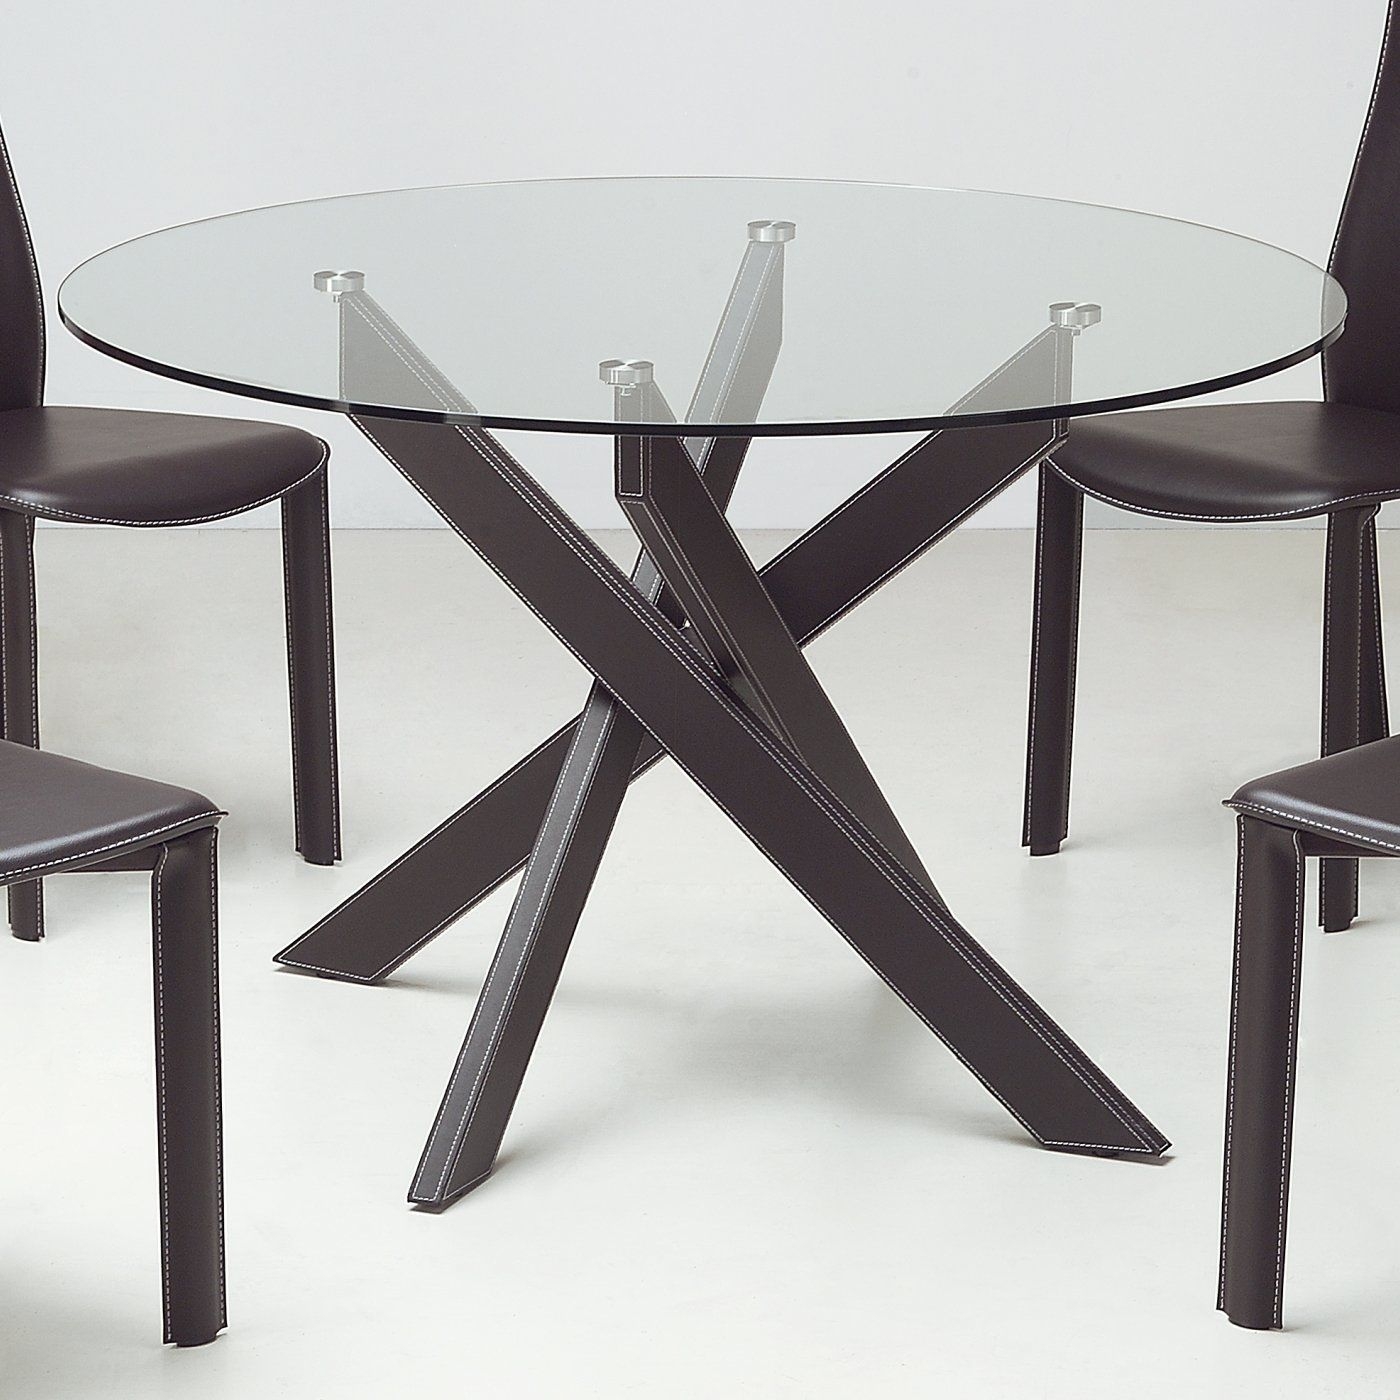 Round clear glass modern dining table